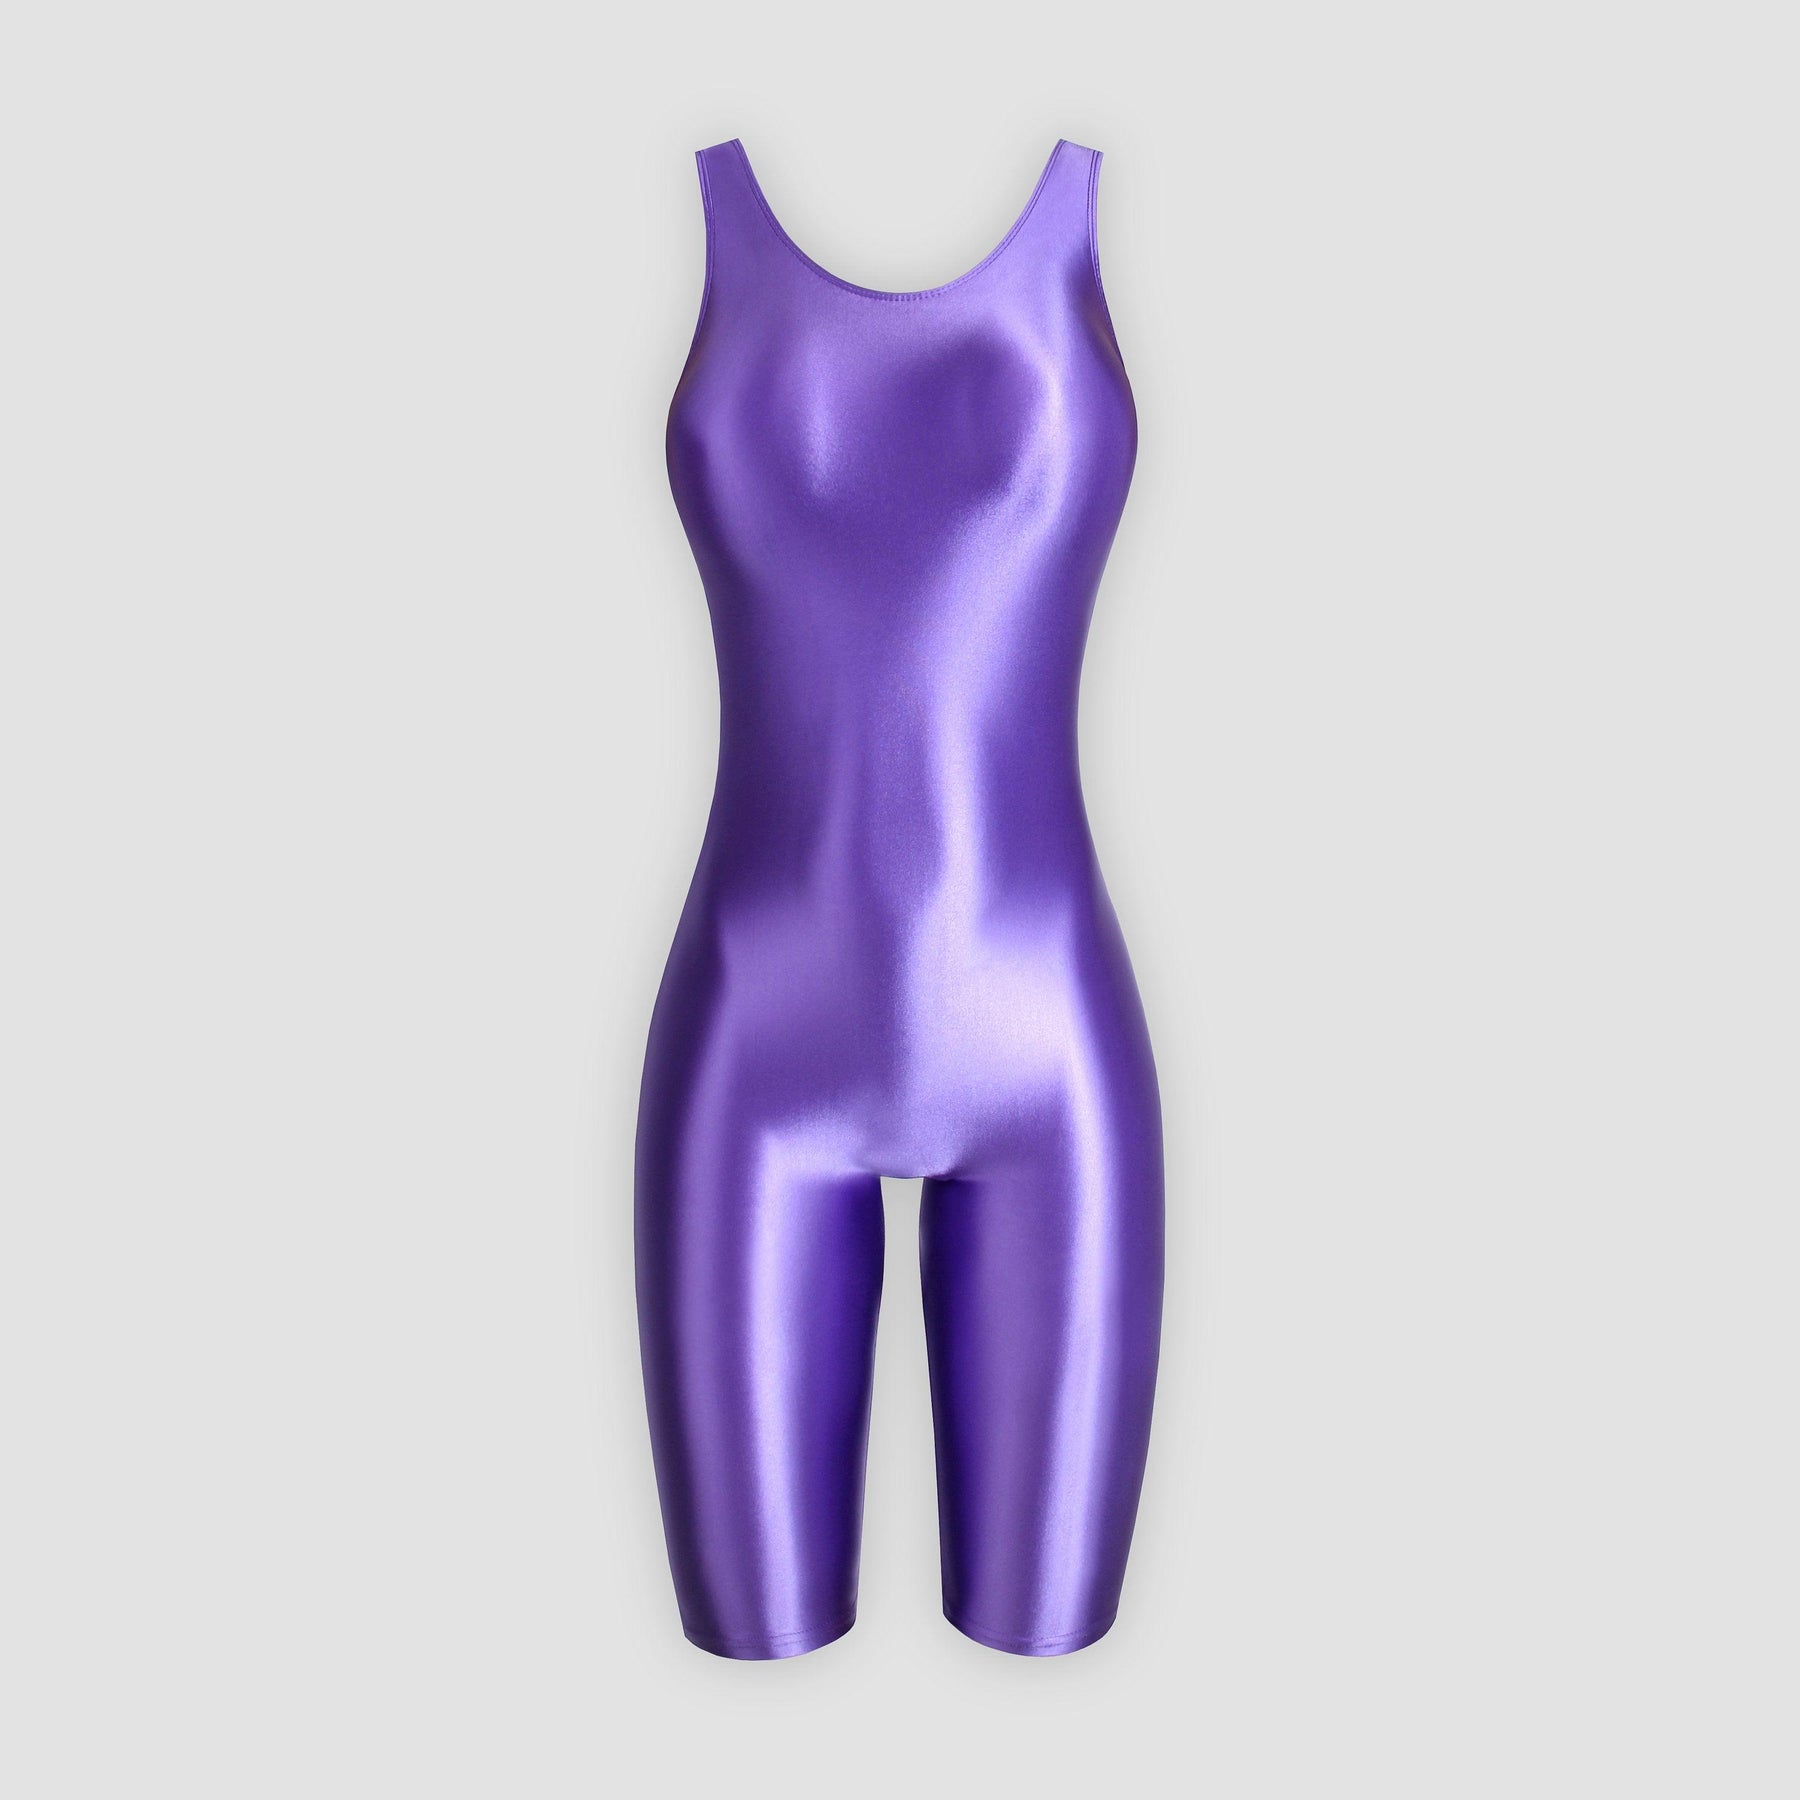 Spandex Bodysuit + Sun =, Shiny Body & the tights are aweso…